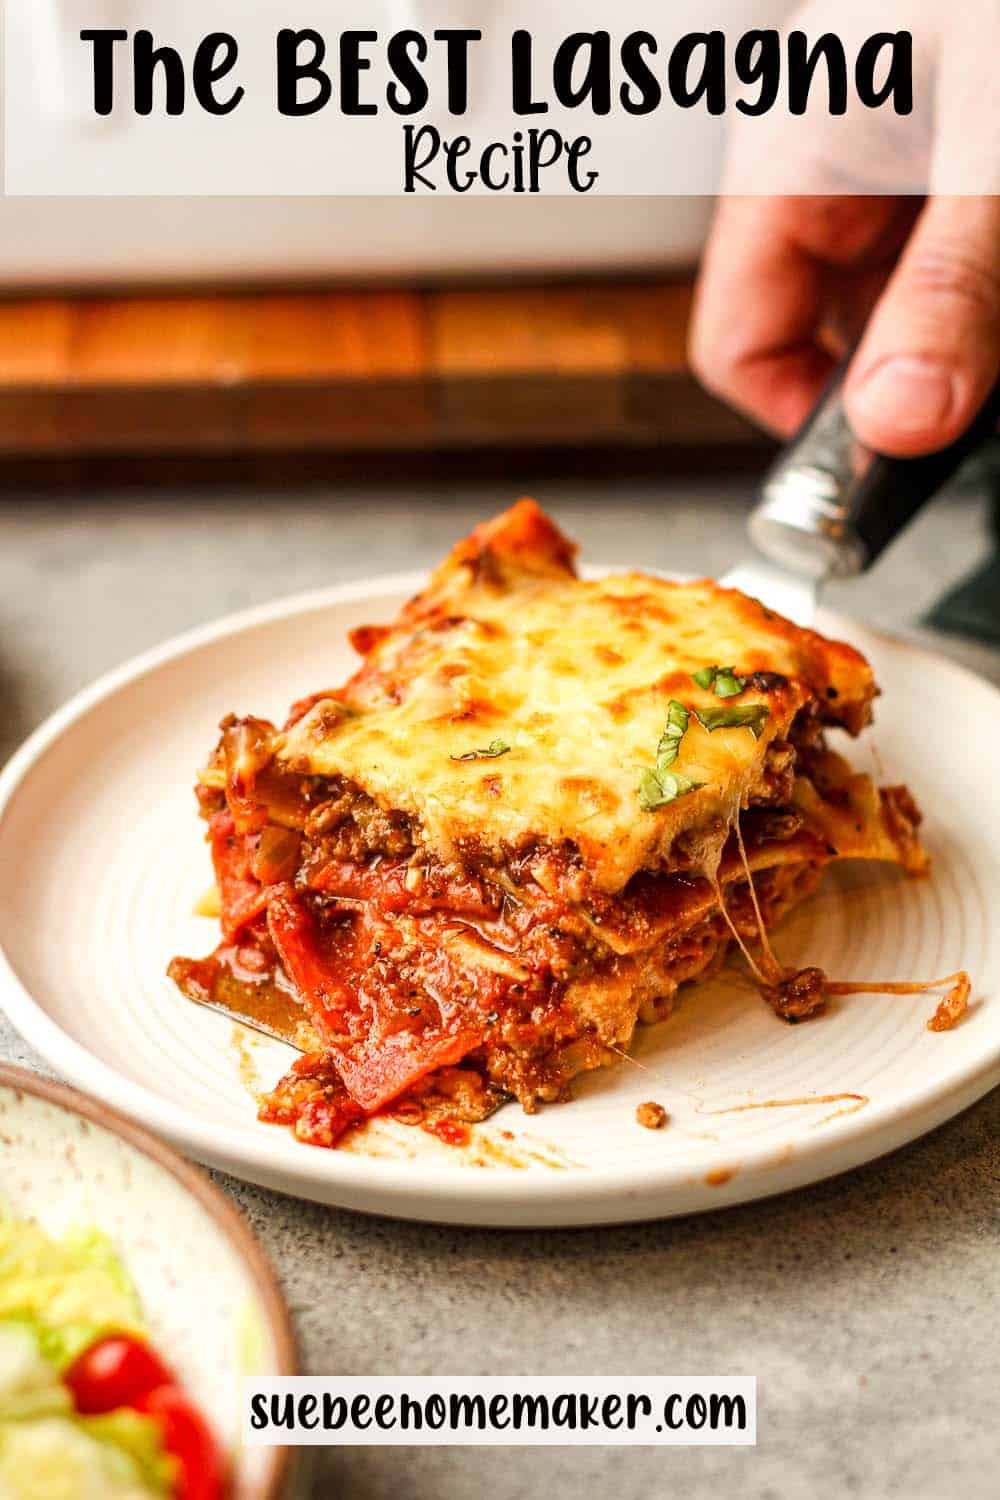 Side view of a hand placing a piece of lasagna on a serving plate.